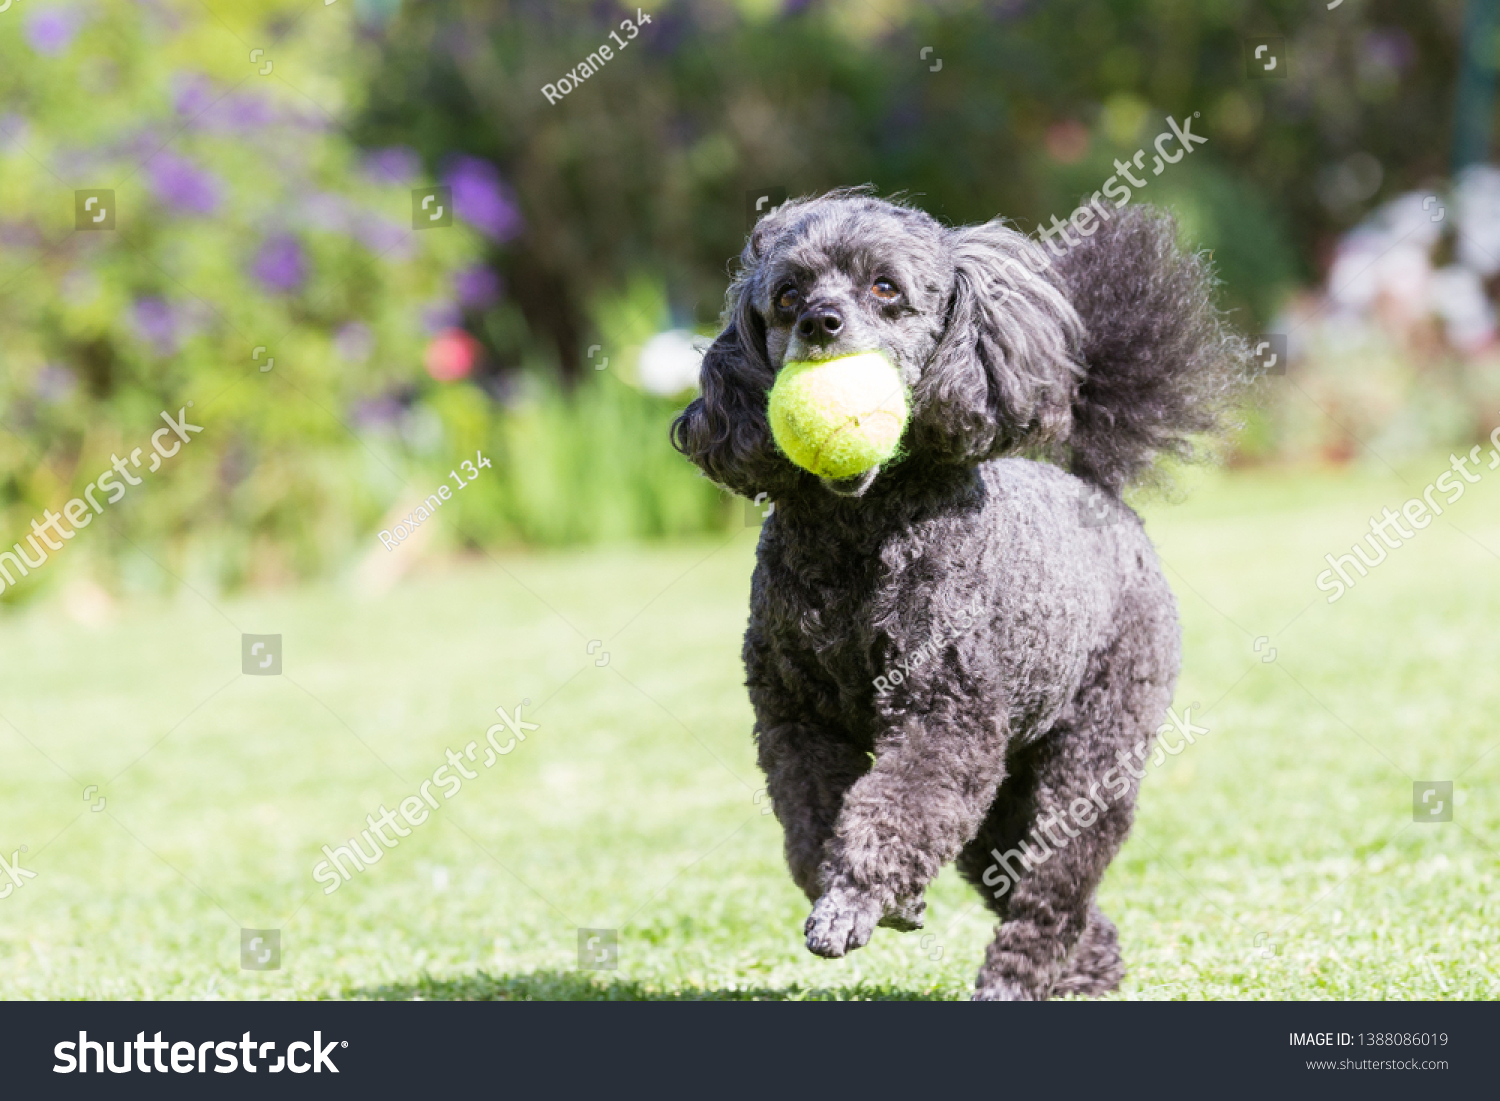 Cute Small Black Miniature Poodle Dog Stock Photo Edit Now 1388086019